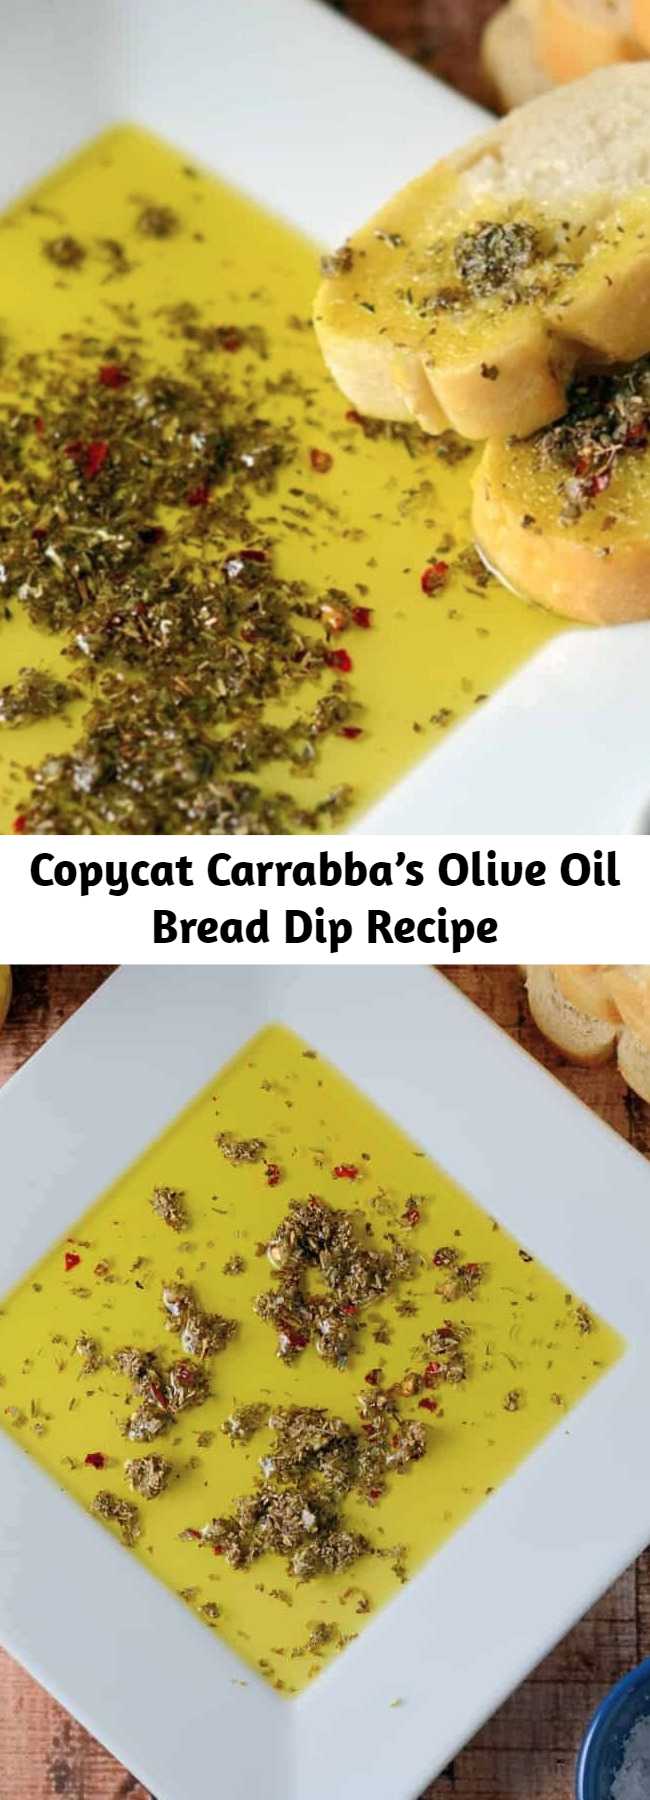 Copycat Carrabba’s Olive Oil Bread Dip Recipe - The best bread dip recipe out there! Use as a dipping sauce for cheese, meats, drizzle on salads or mix into pasta sauce. These are the best dipping spices to make ahead and keep it in the pantry!